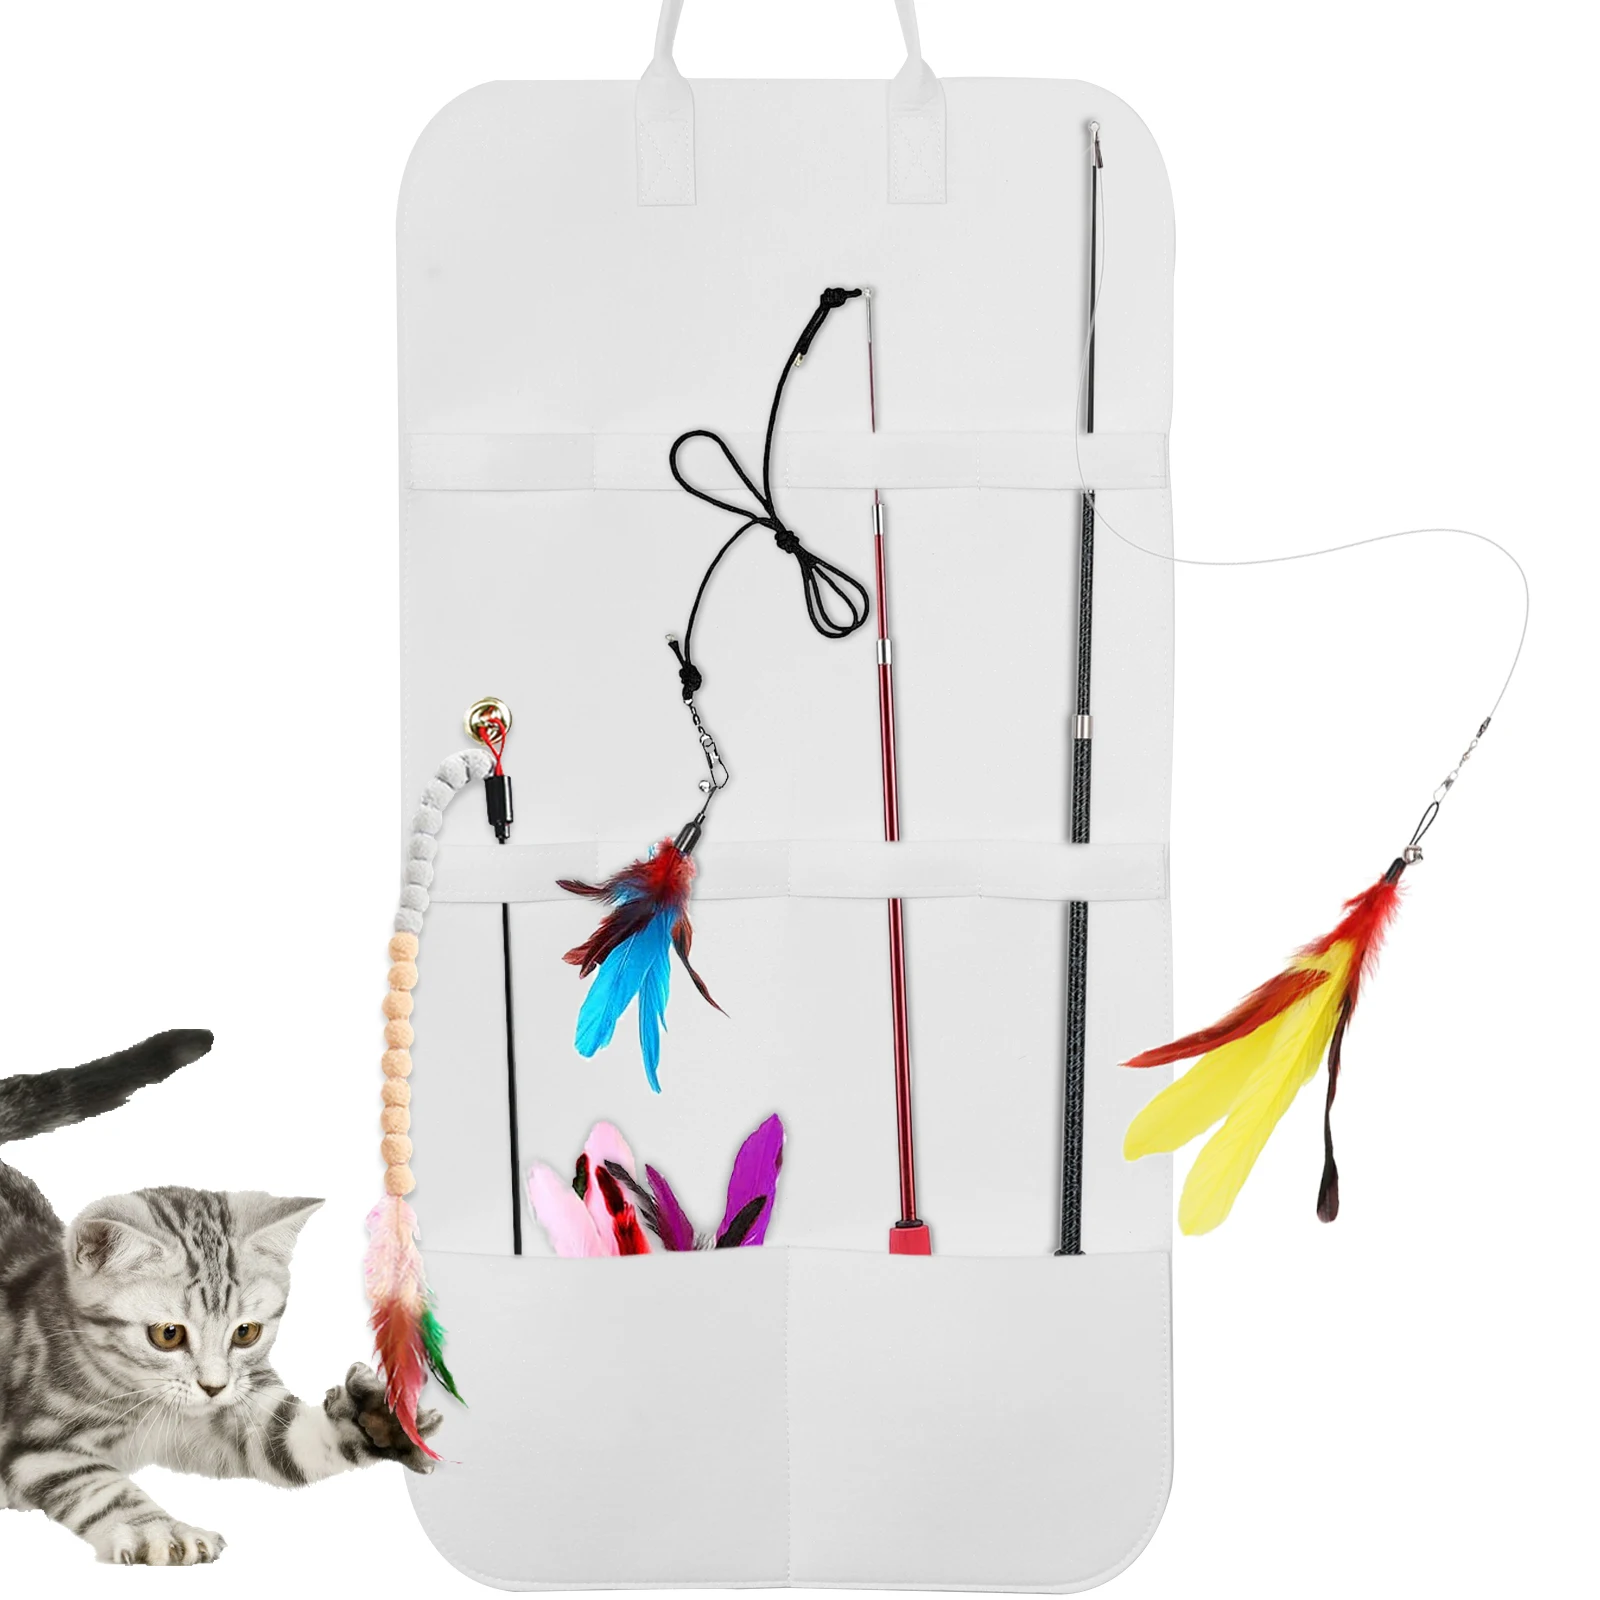 Cat Wand Toy Hanging Organizer Felt Hanging Cat Teaser Wand Holder Storage Bag Cat Toy Hanging Organizer for door wall